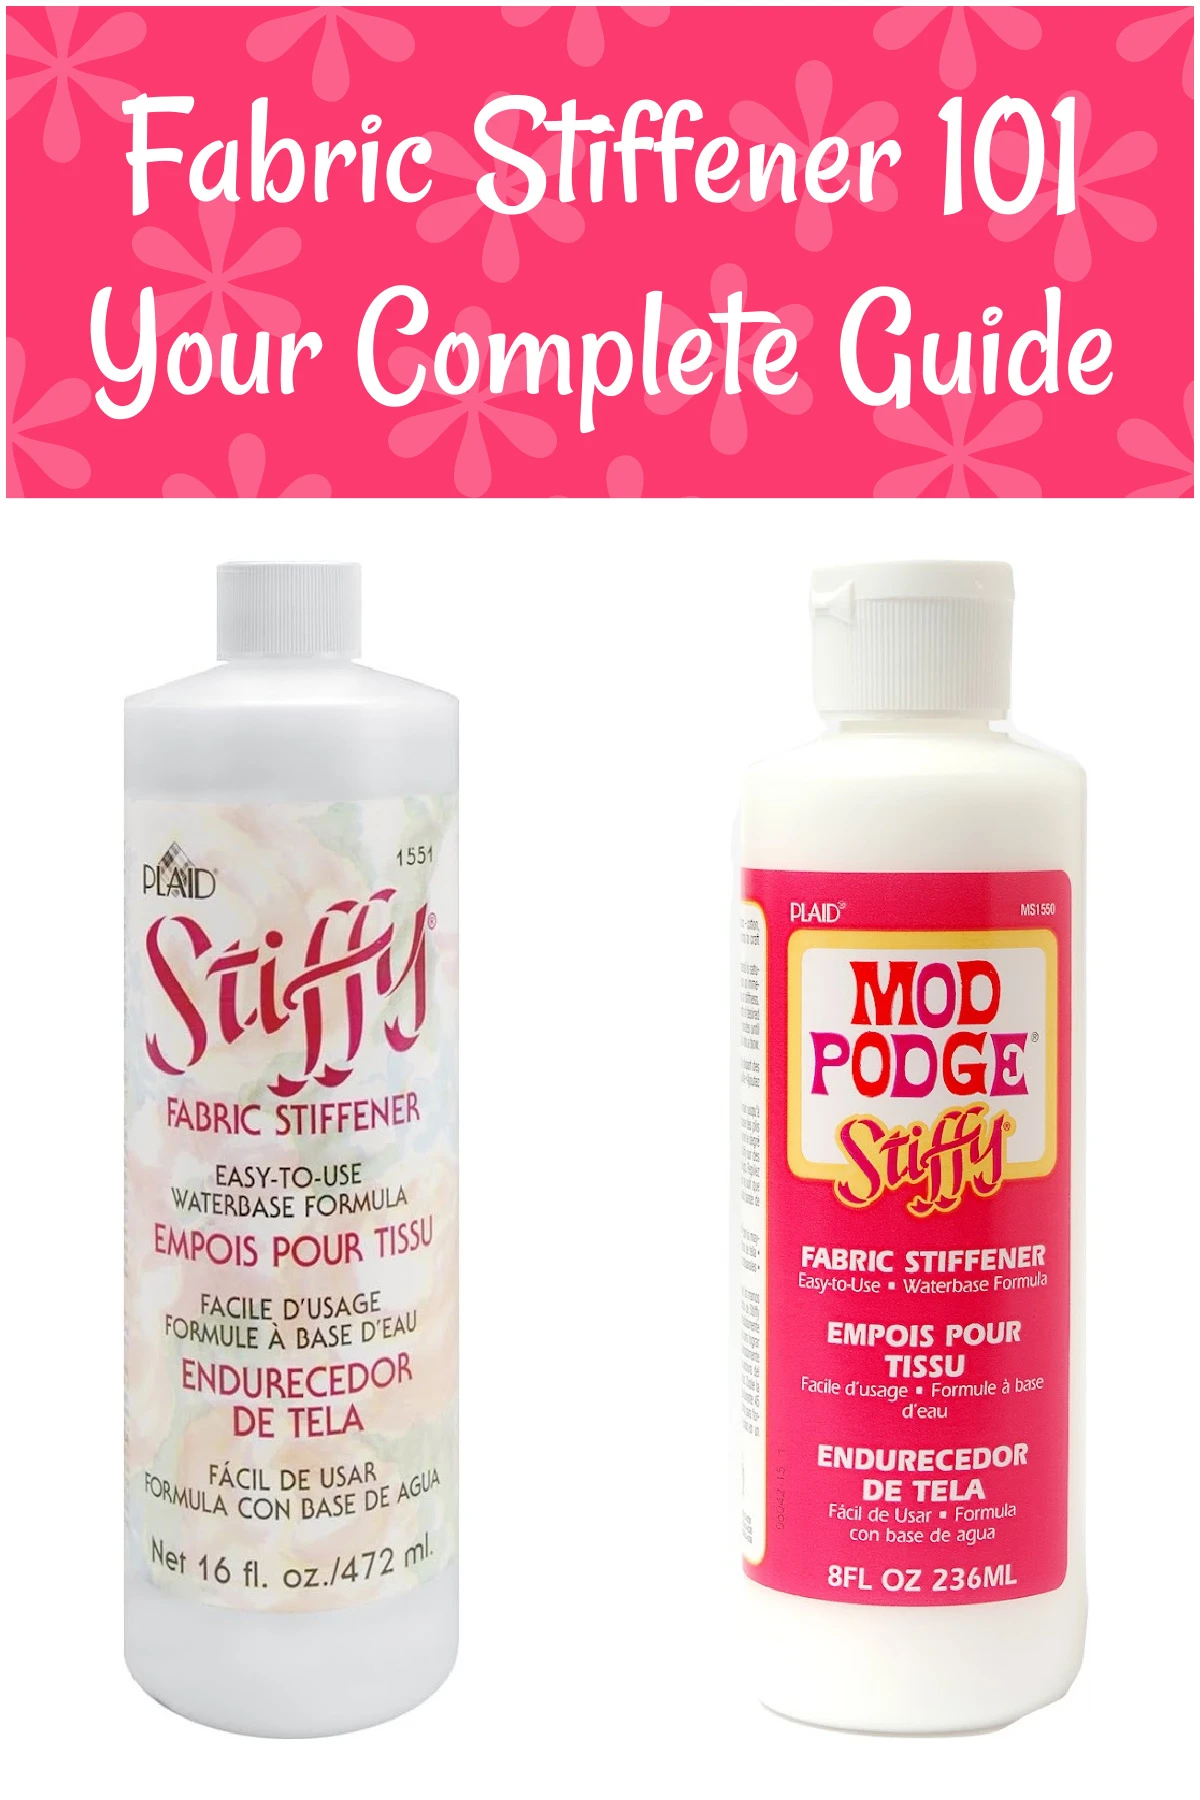 Fabric Stiffener 101: Your Complete Guide - Mod Podge Rocks